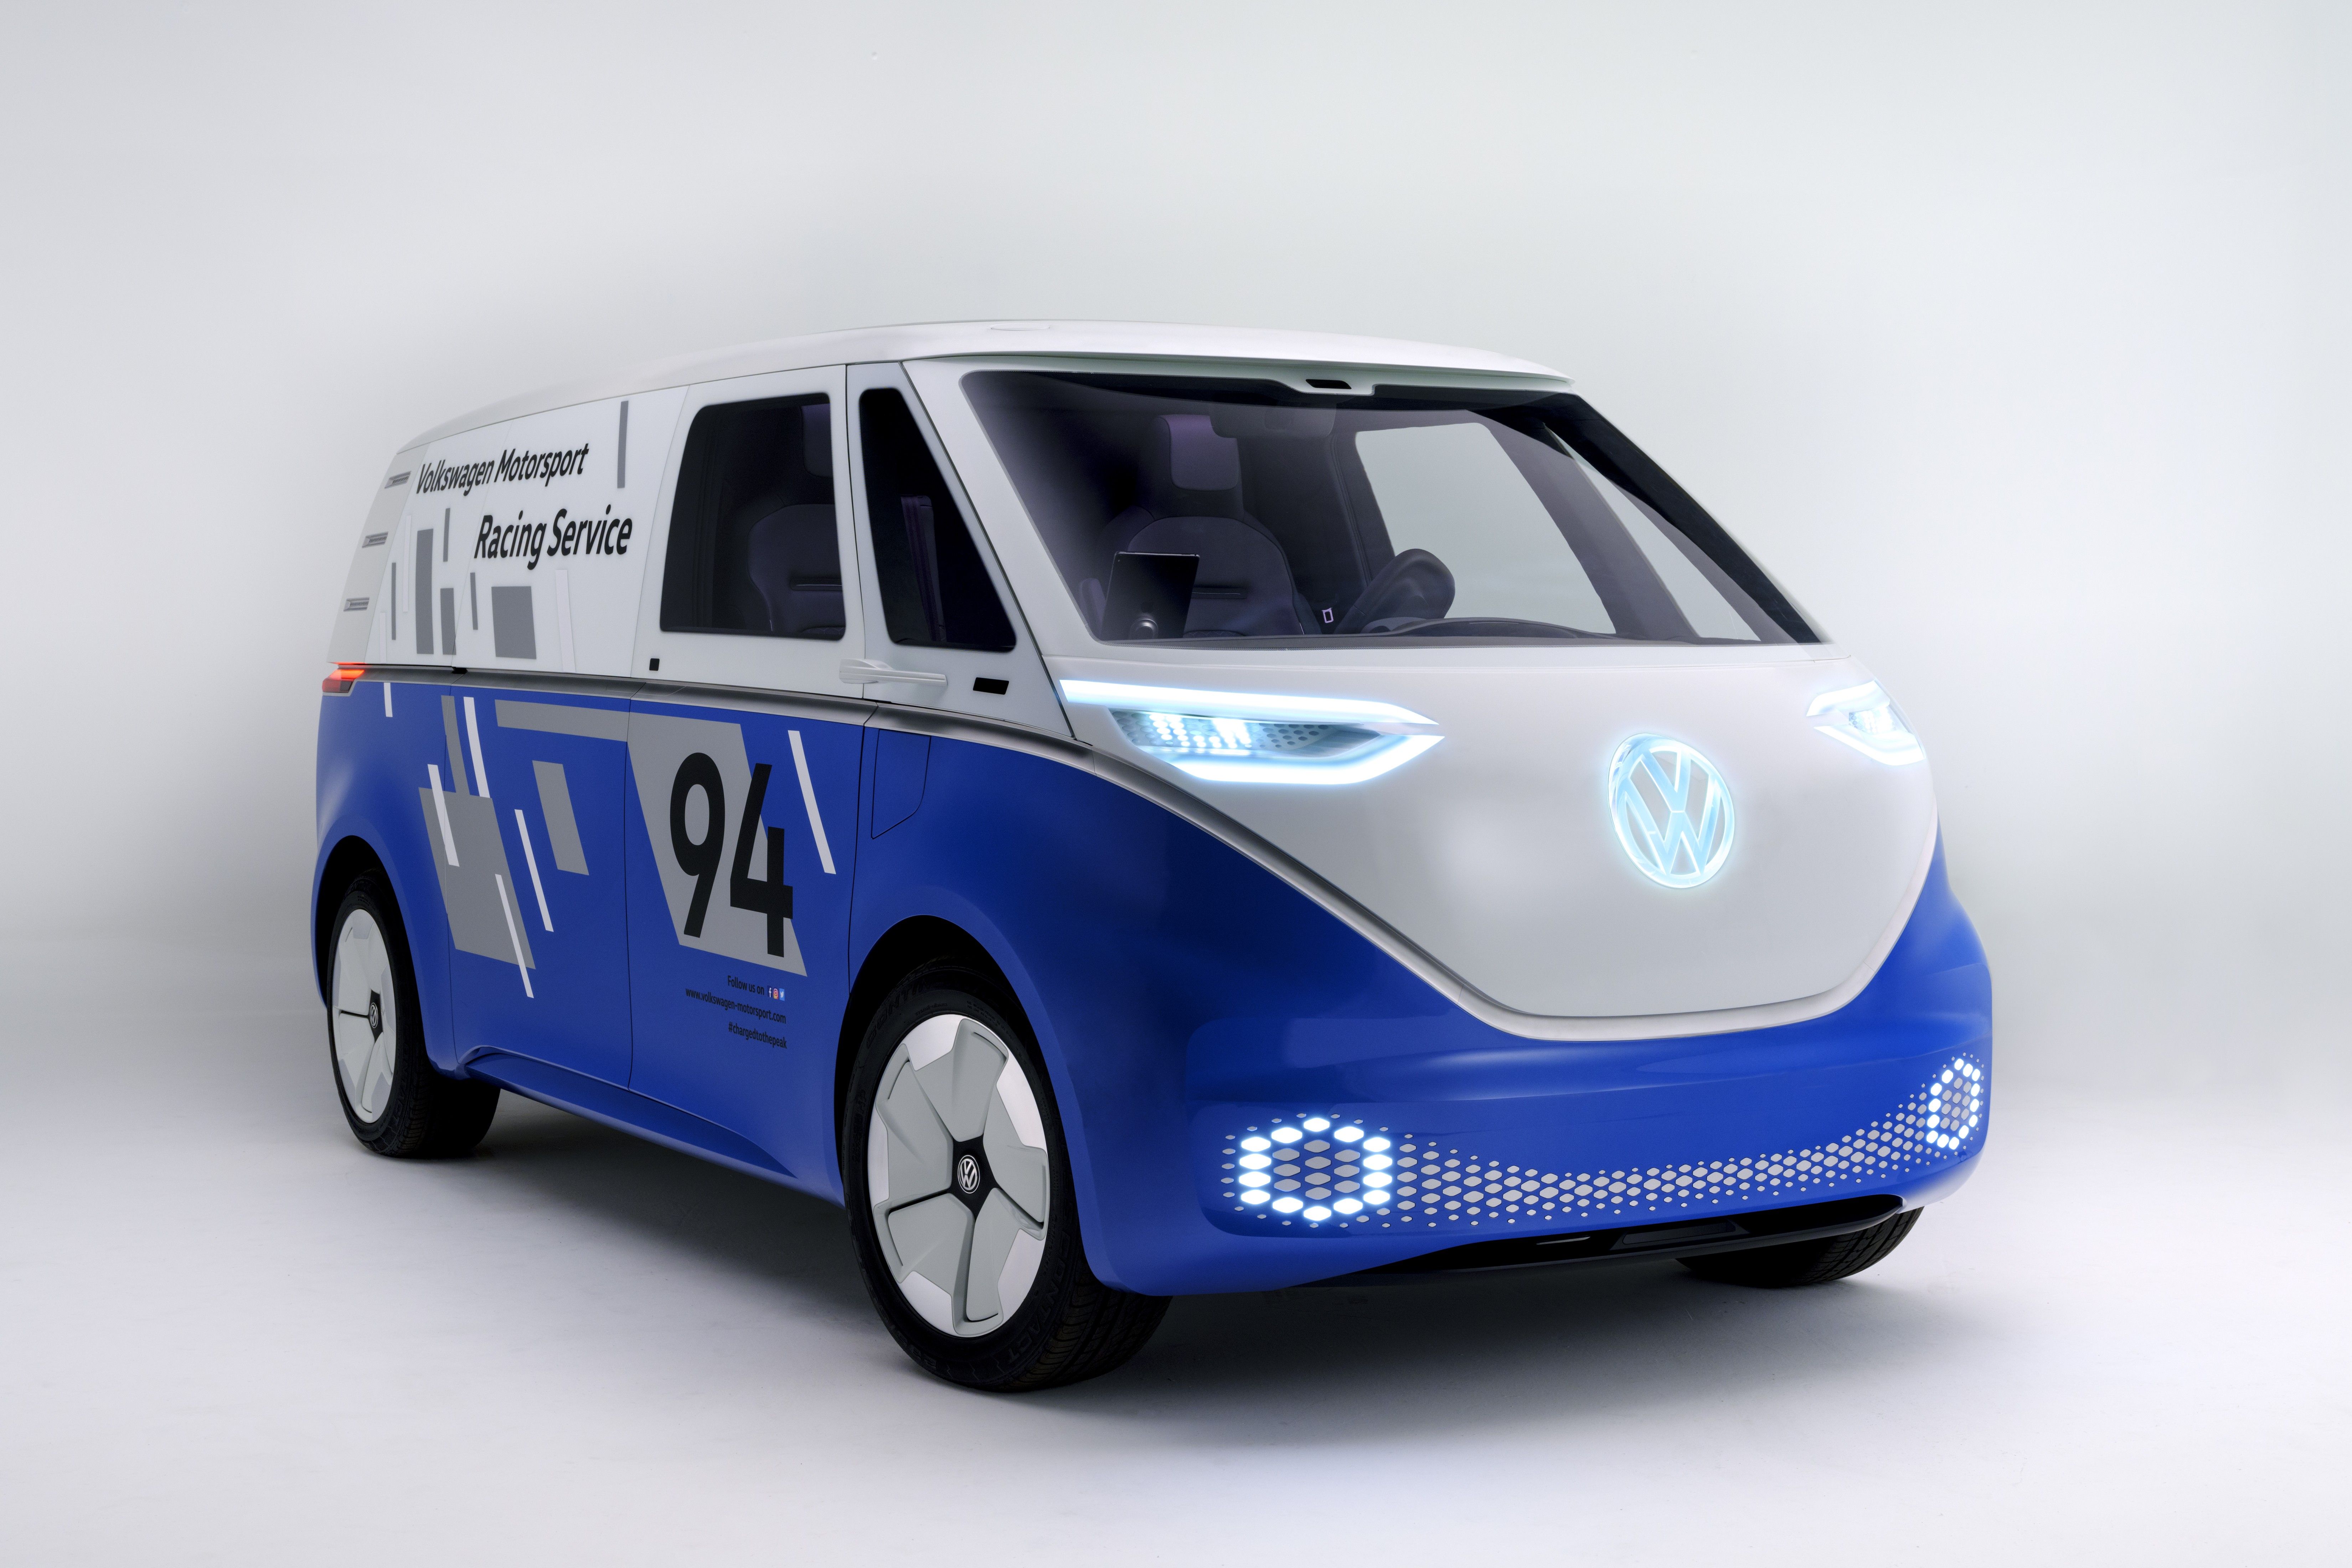 2020 Moving towards electric cars, Volkswagen plans a 6% cut of his workforces by 2023 and 2,000 new software jobs positions. 